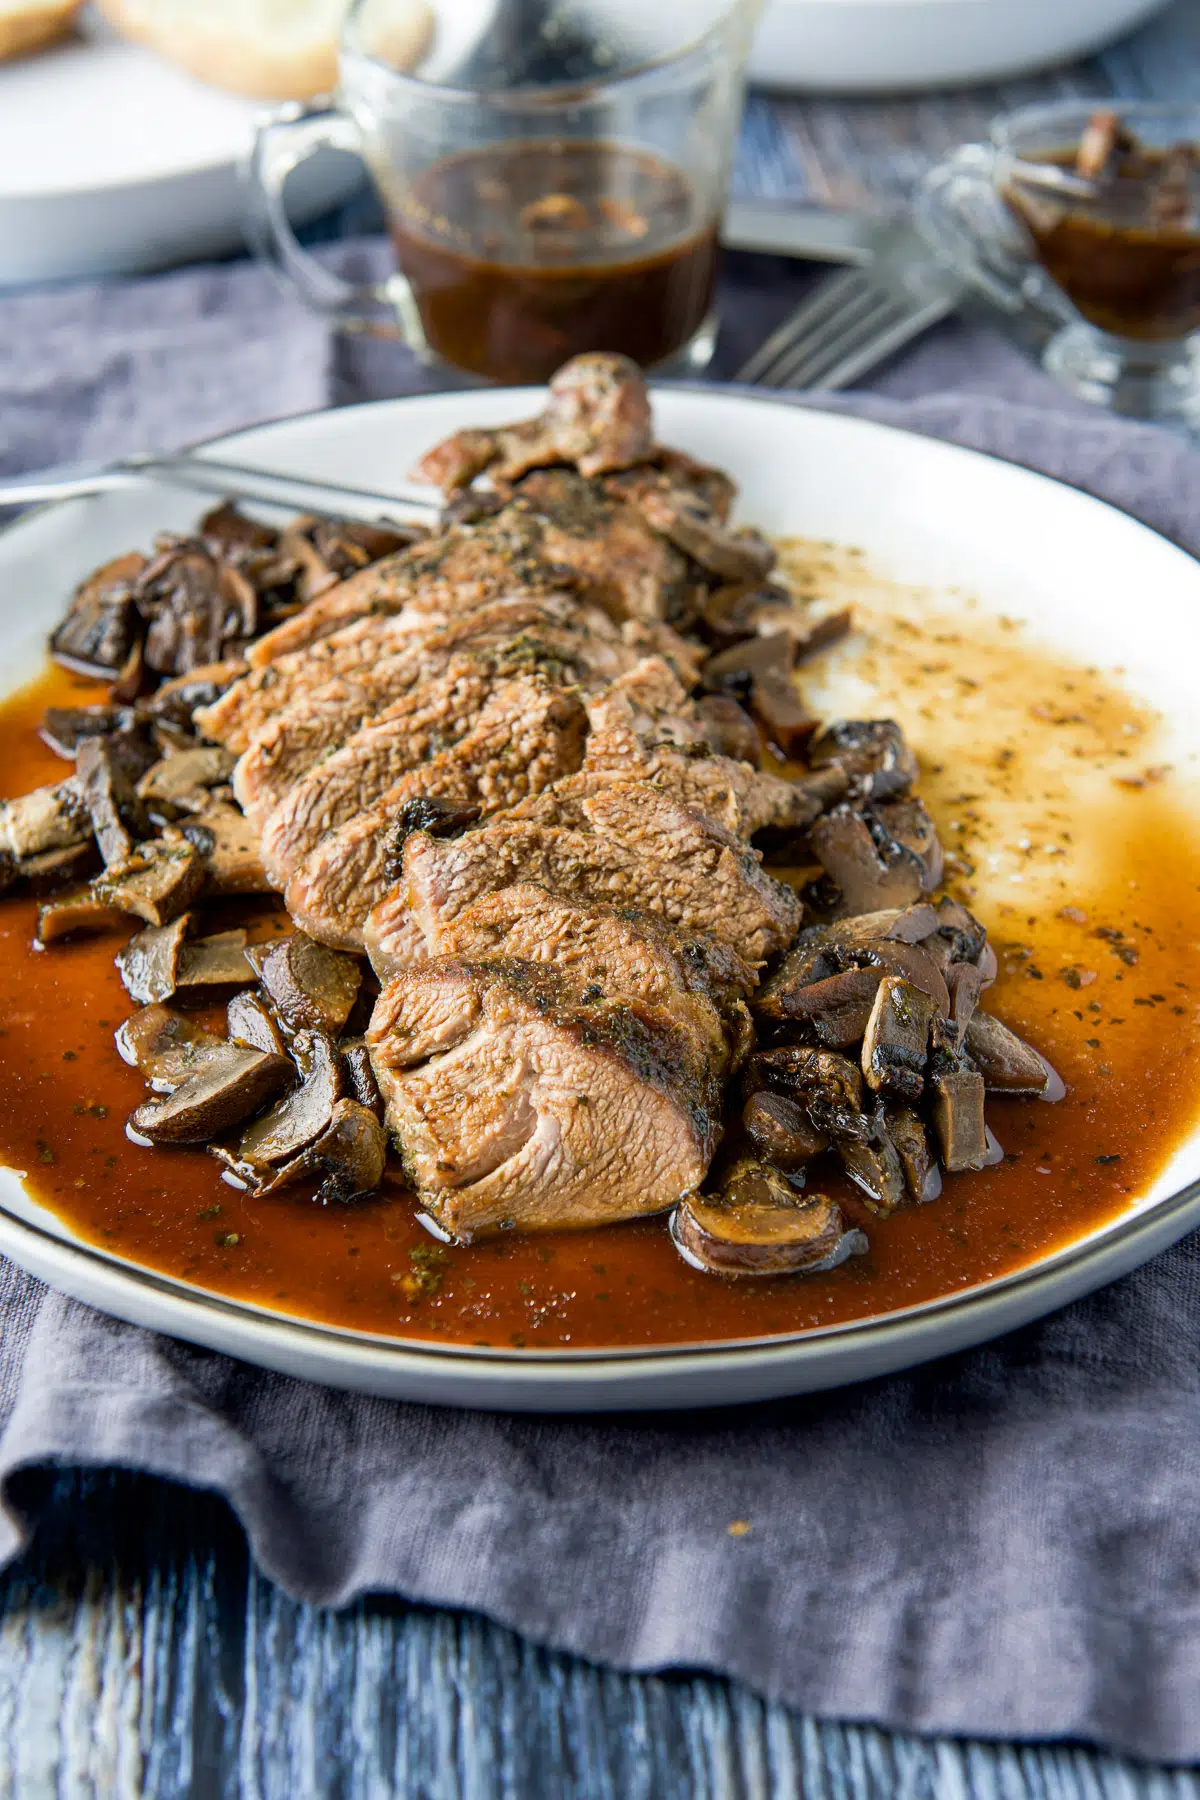 Tenderloin cut in slices with marinade on it and mushrooms on the side